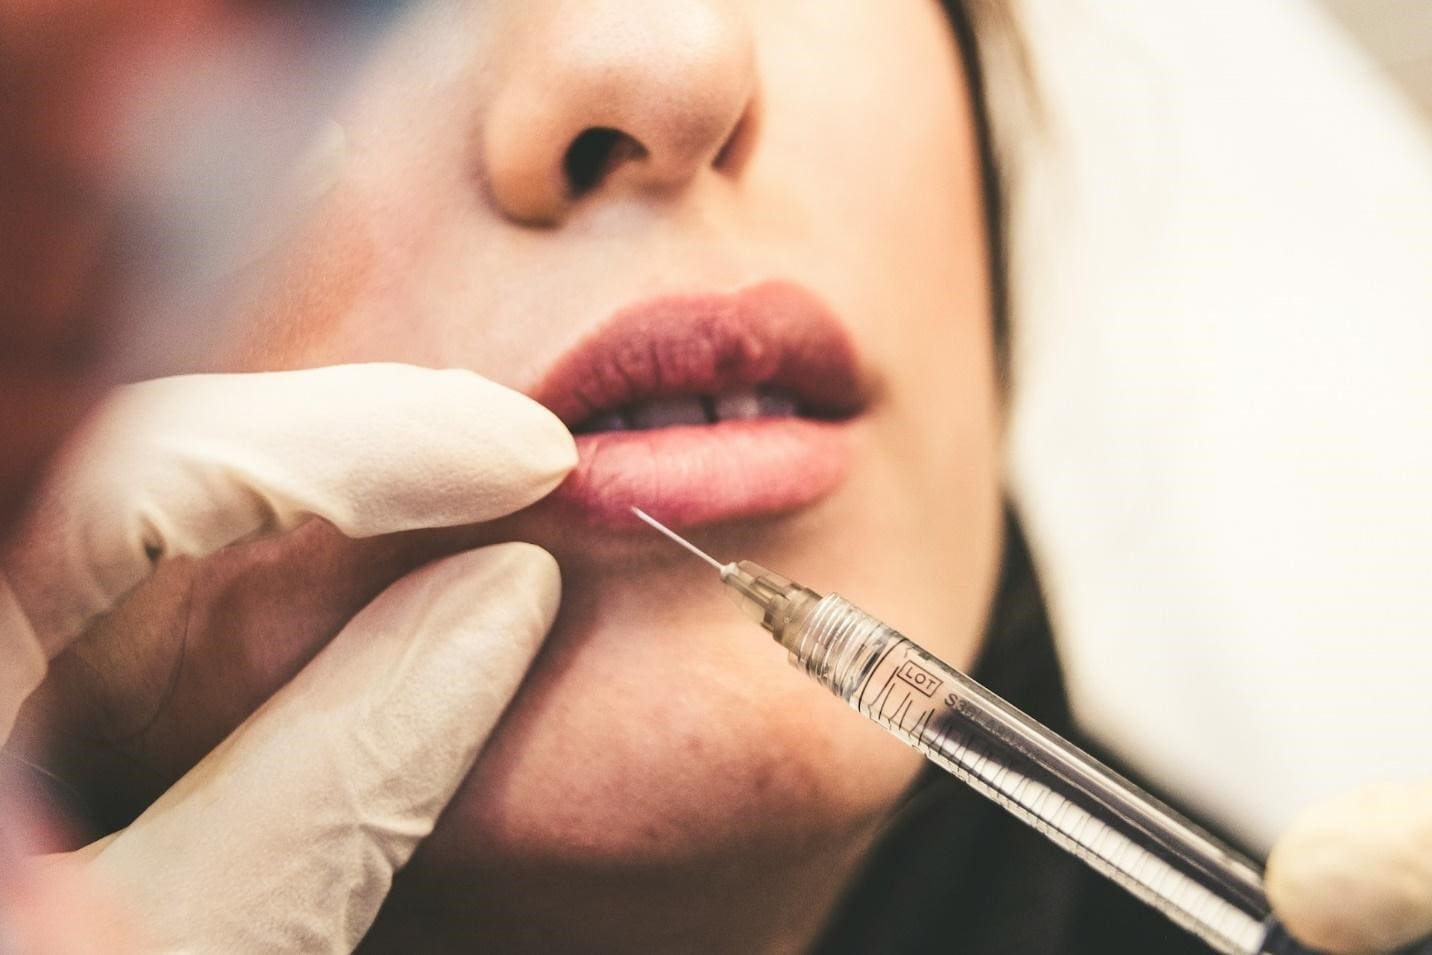 A Woman Getting a Dermal Filler Injection